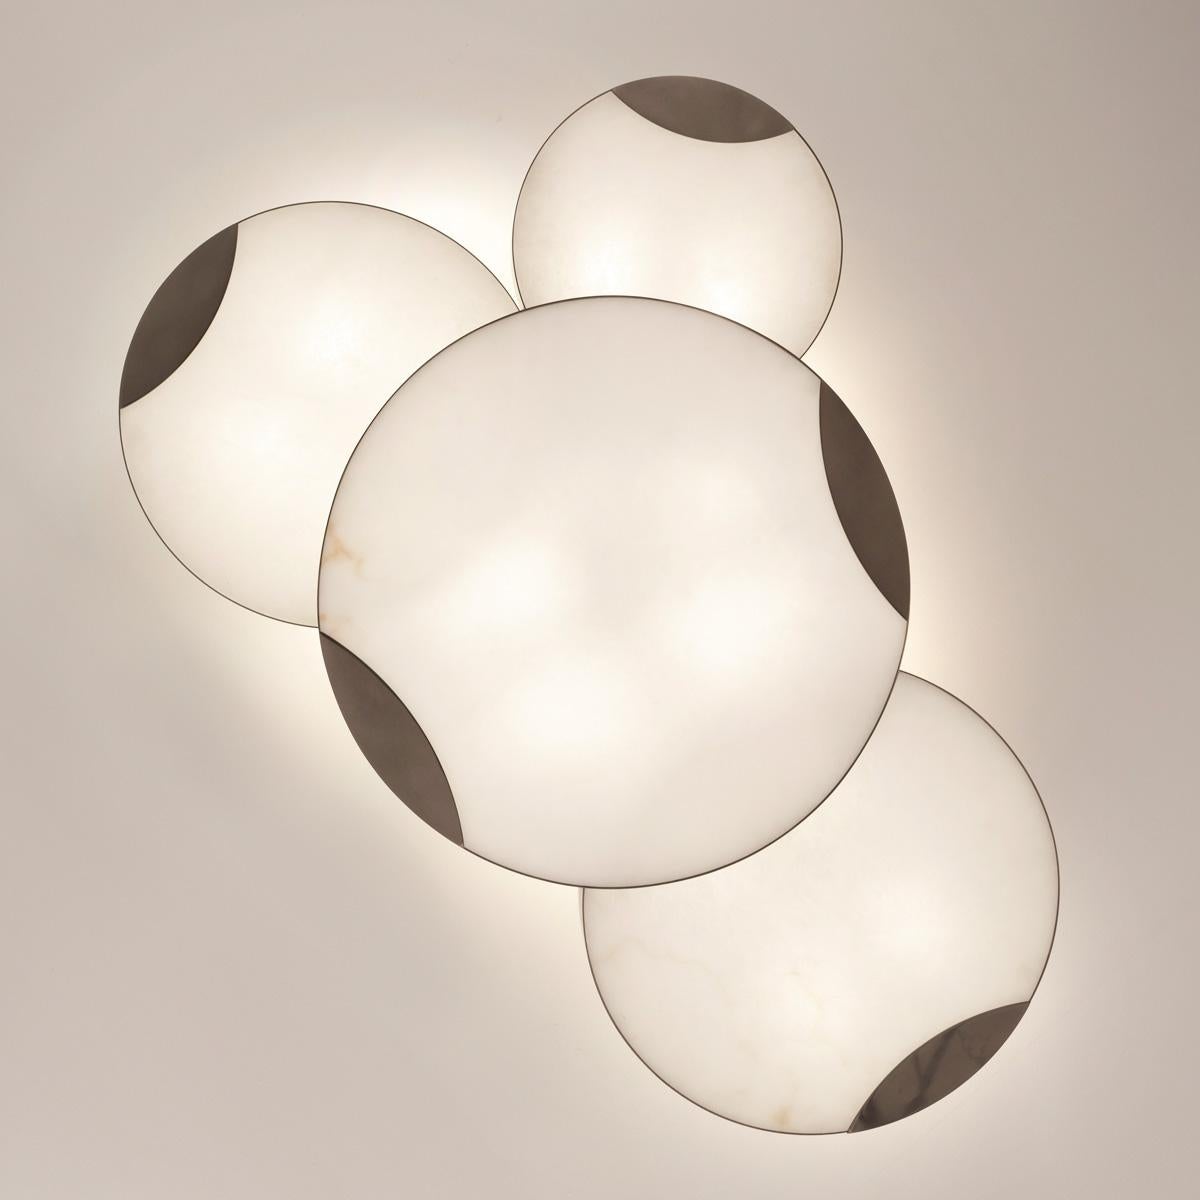 Contemporary Cloud N.4 Ceiling Light by Gaspare Asaro-Peltro Finish For Sale